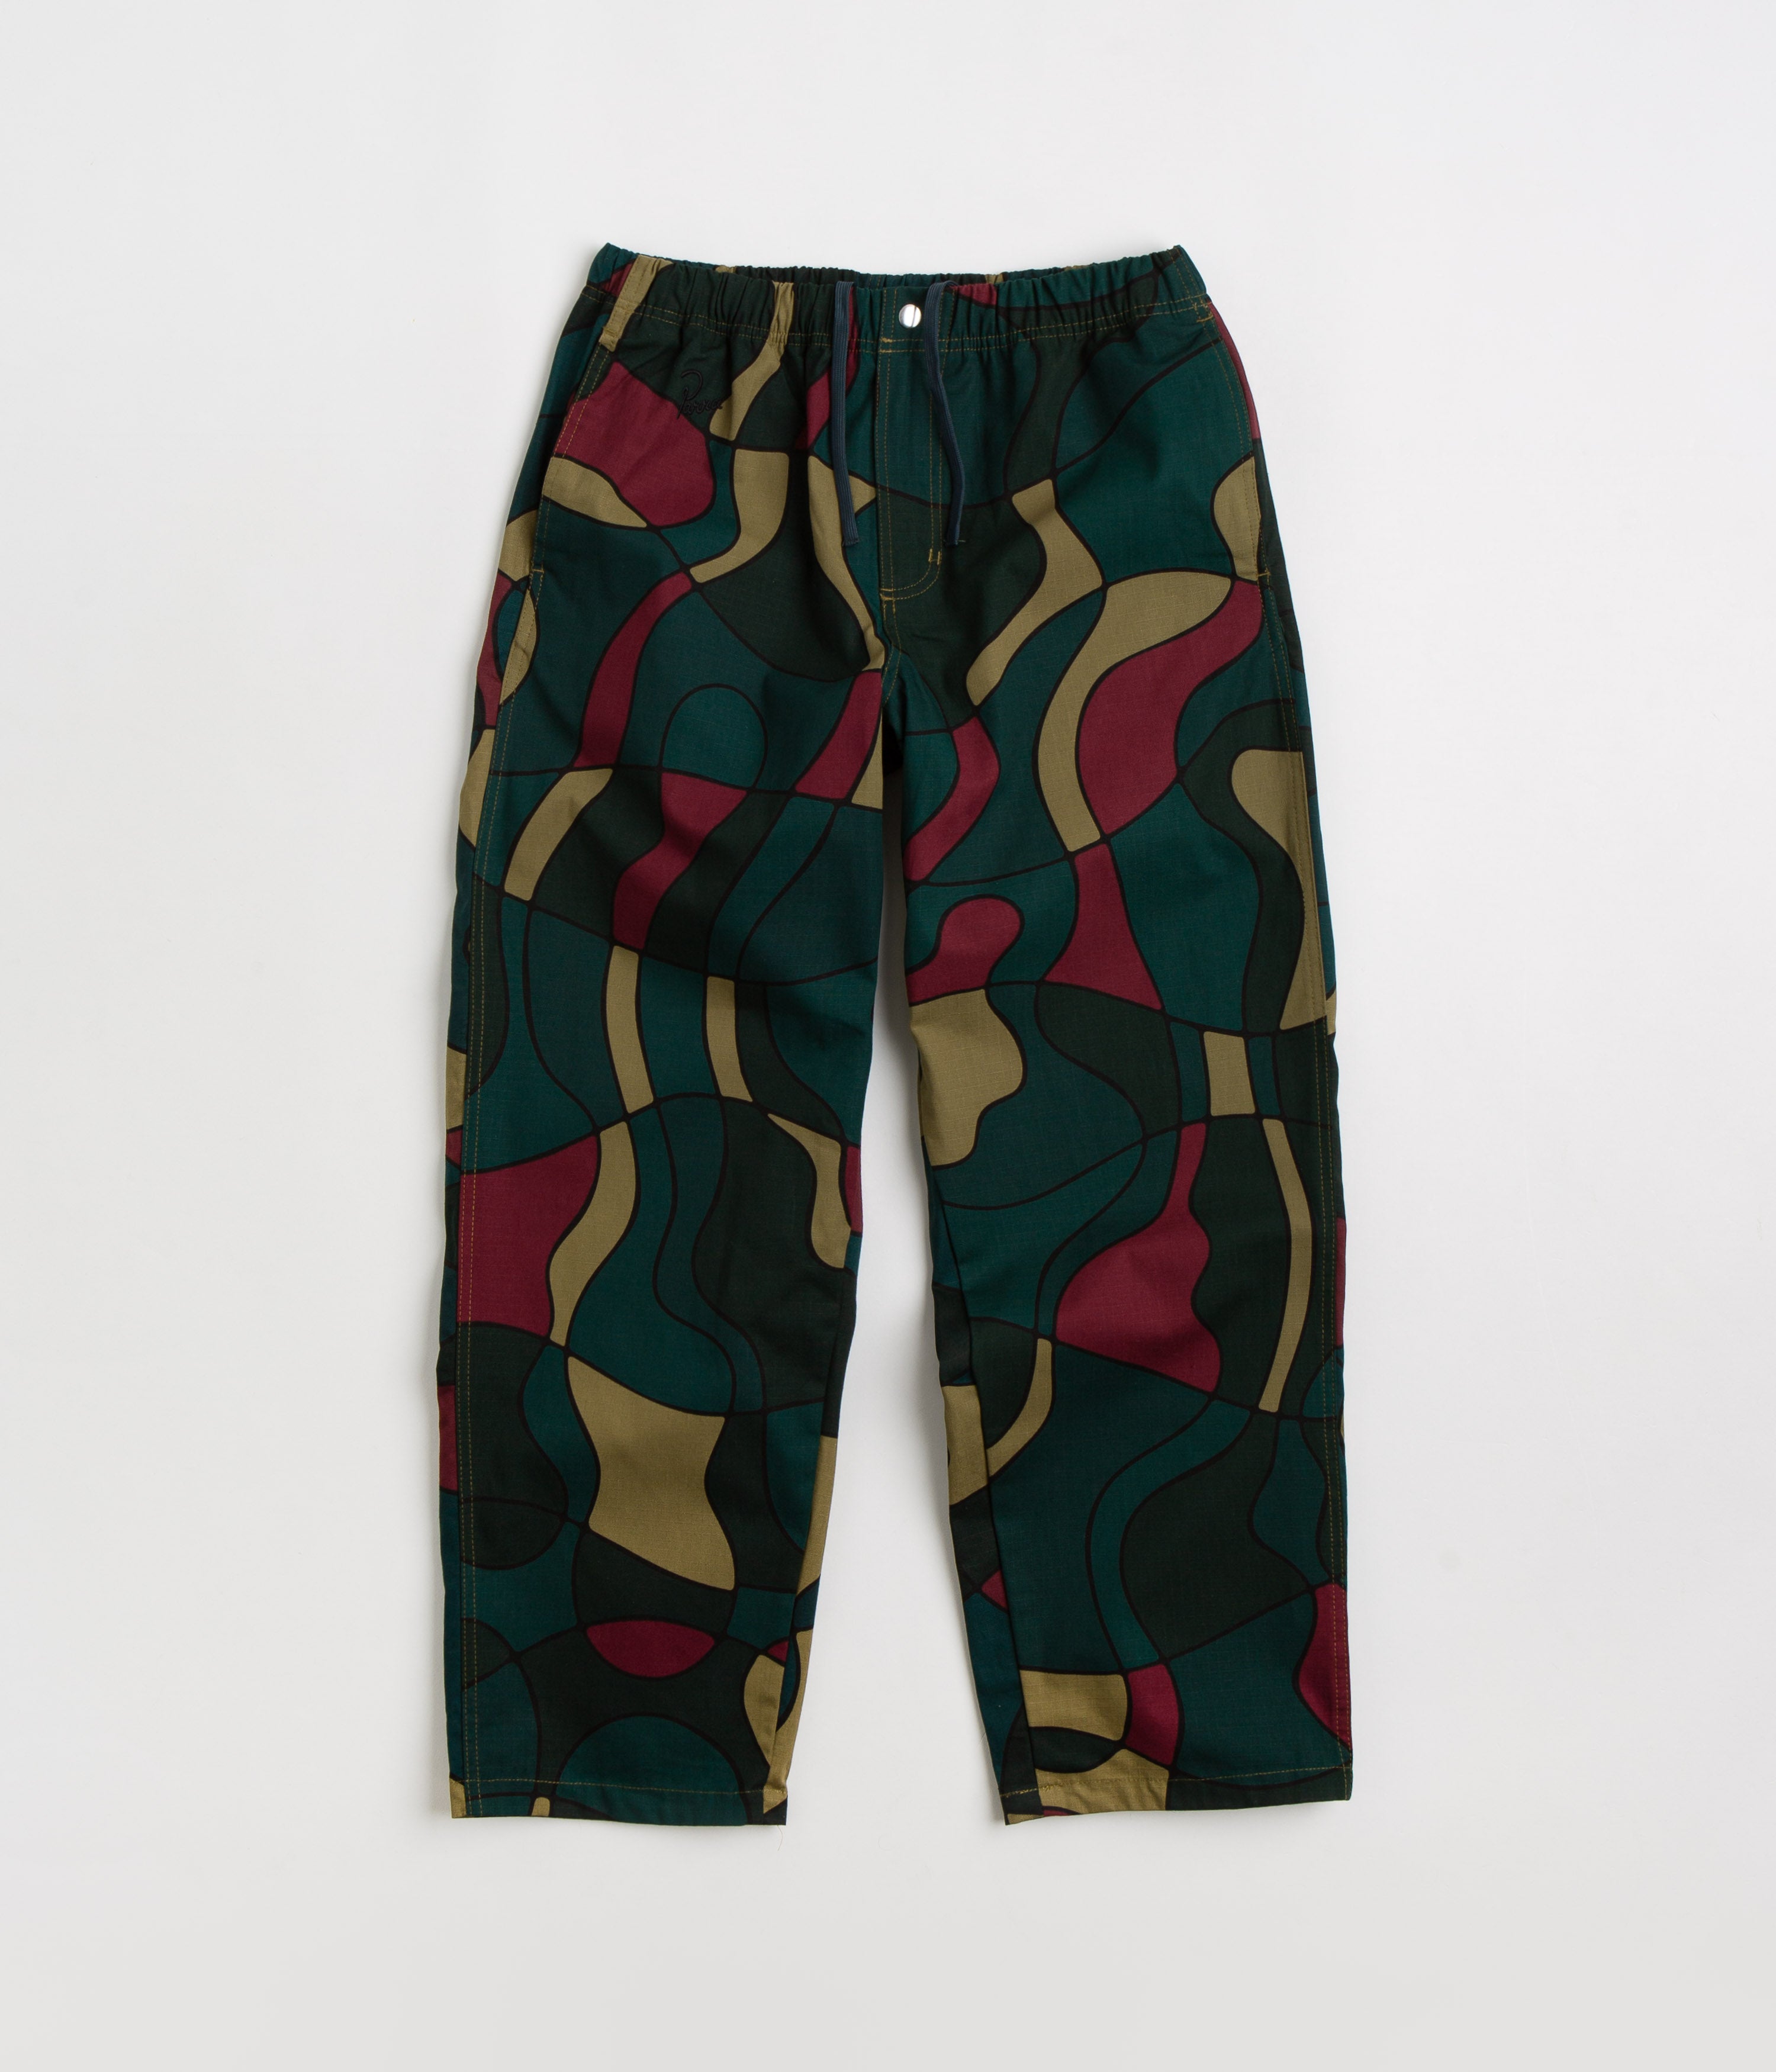 Vans Eastside Lime Wind Pants - green L at Urban Outfitters | Compare |  Trinity Leeds